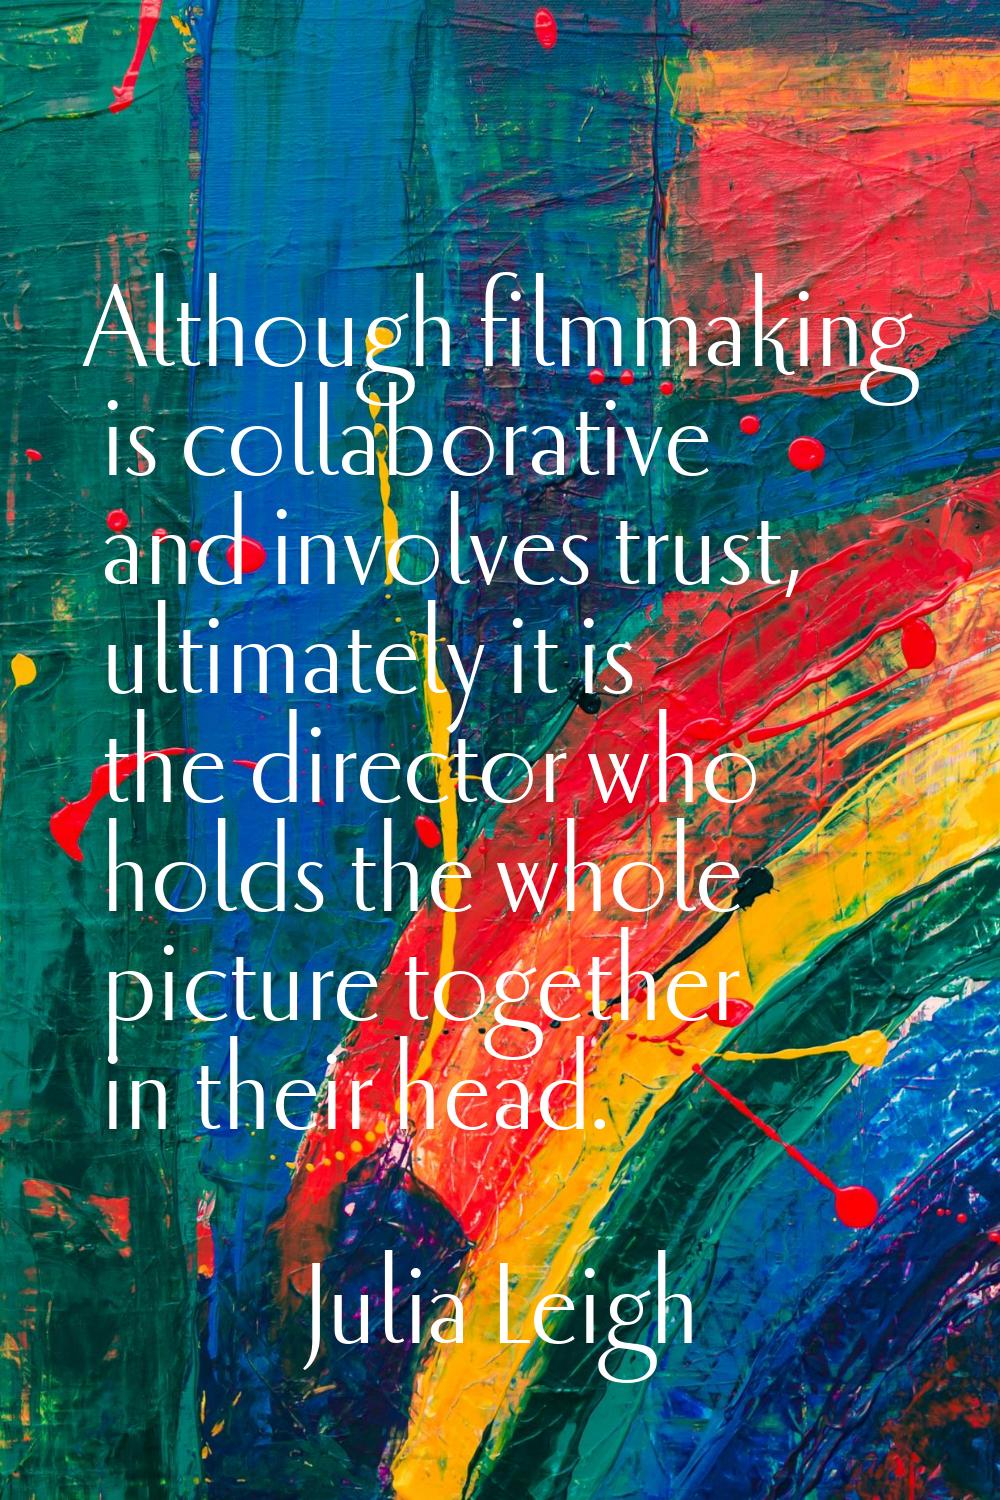 Although filmmaking is collaborative and involves trust, ultimately it is the director who holds th